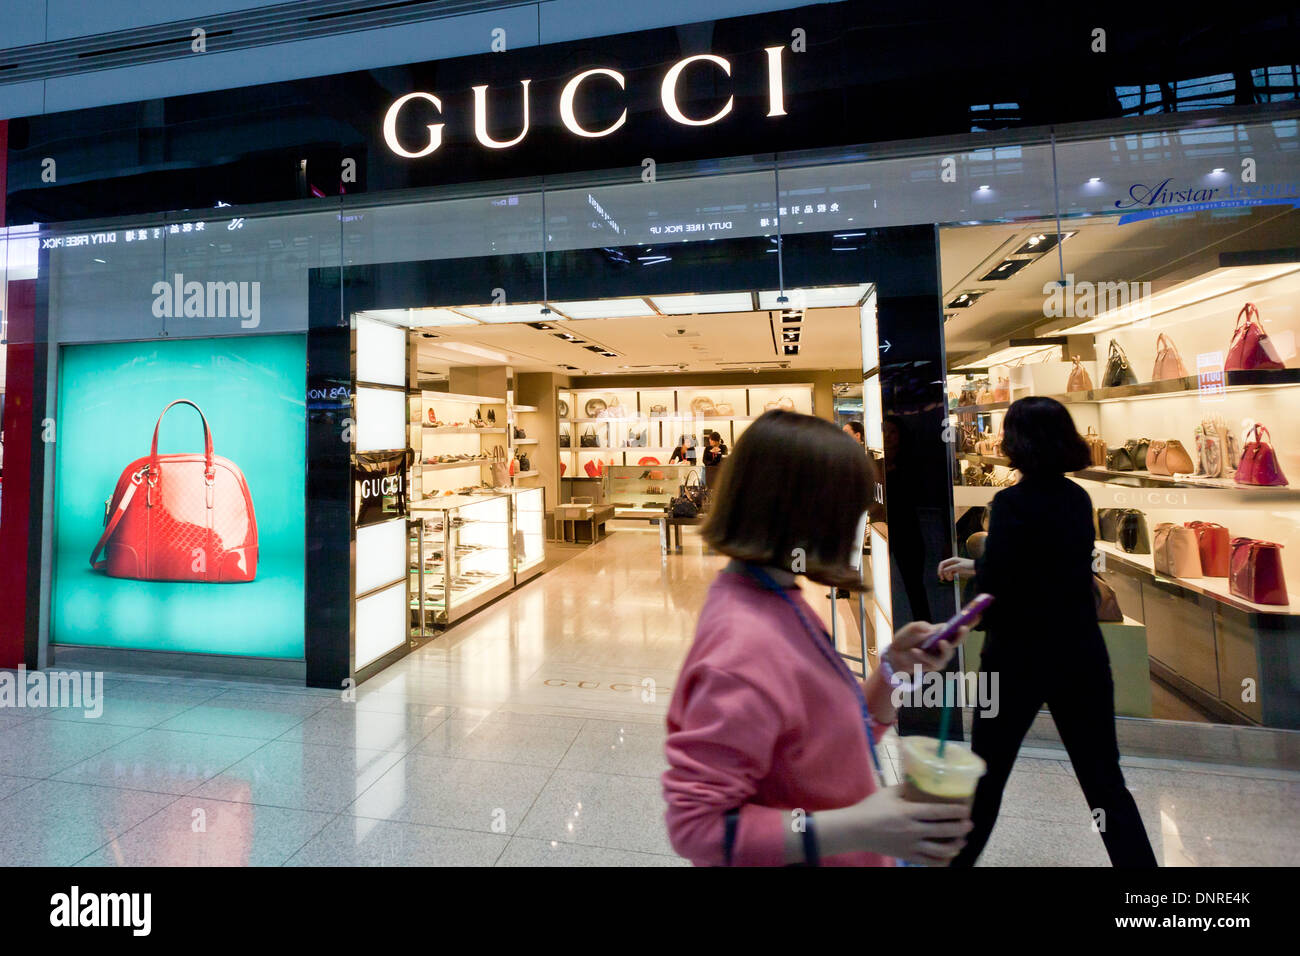 Gucci storefront at Incheon International Airport - South Korea Stock Photo  - Alamy